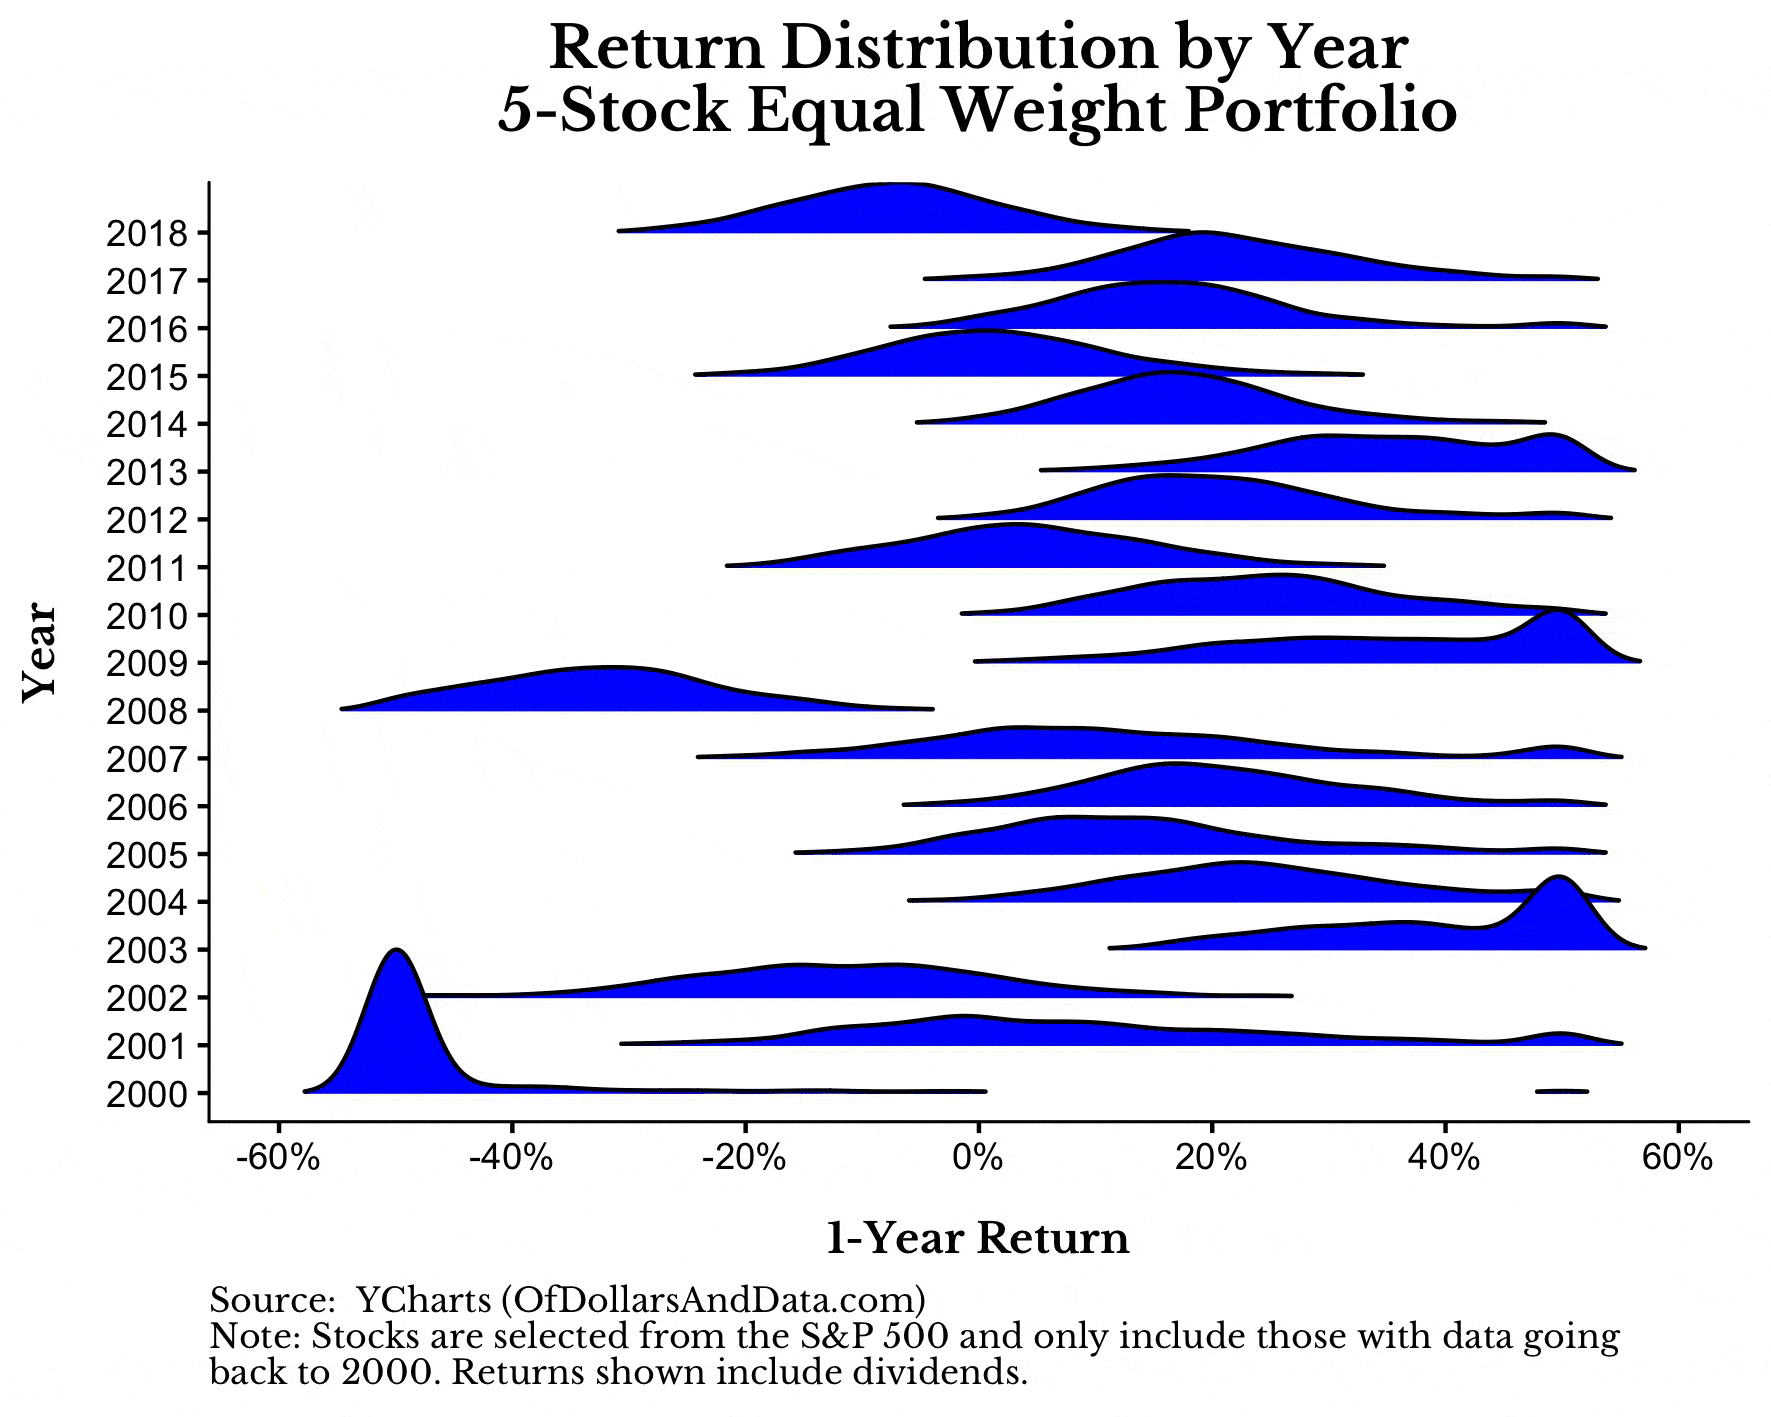 GIF showing the 1-year return distribution by year for various sized equal weight stock portfolios.